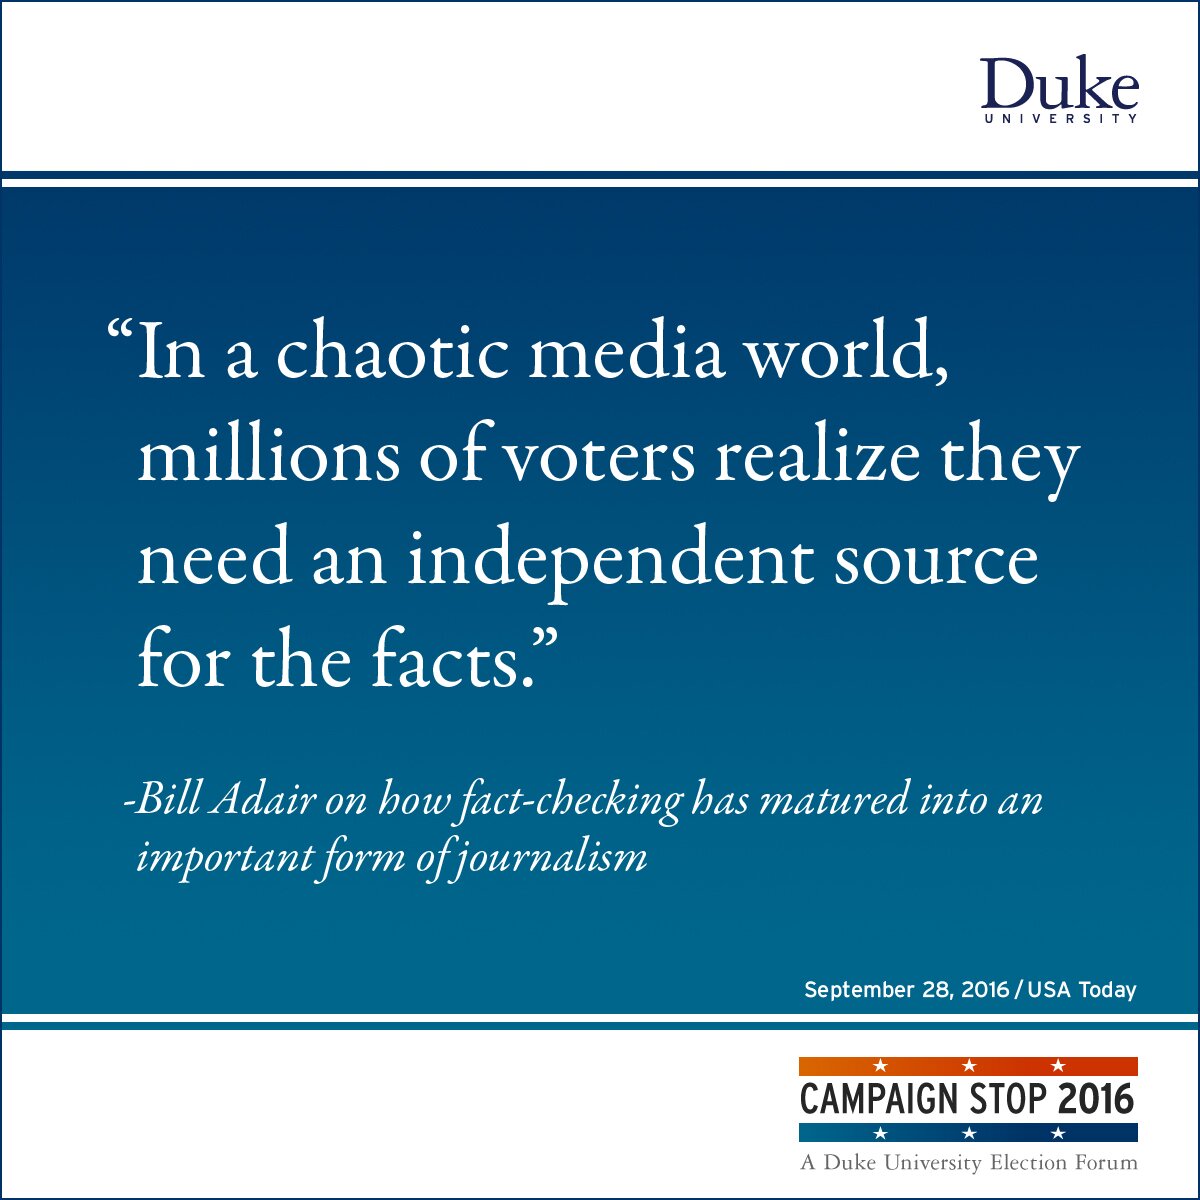 “In a chaotic media world, millions of voters realize they need an independent source for the facts.” -Bill Adair on how fact-checking has matured into an important form of journalism